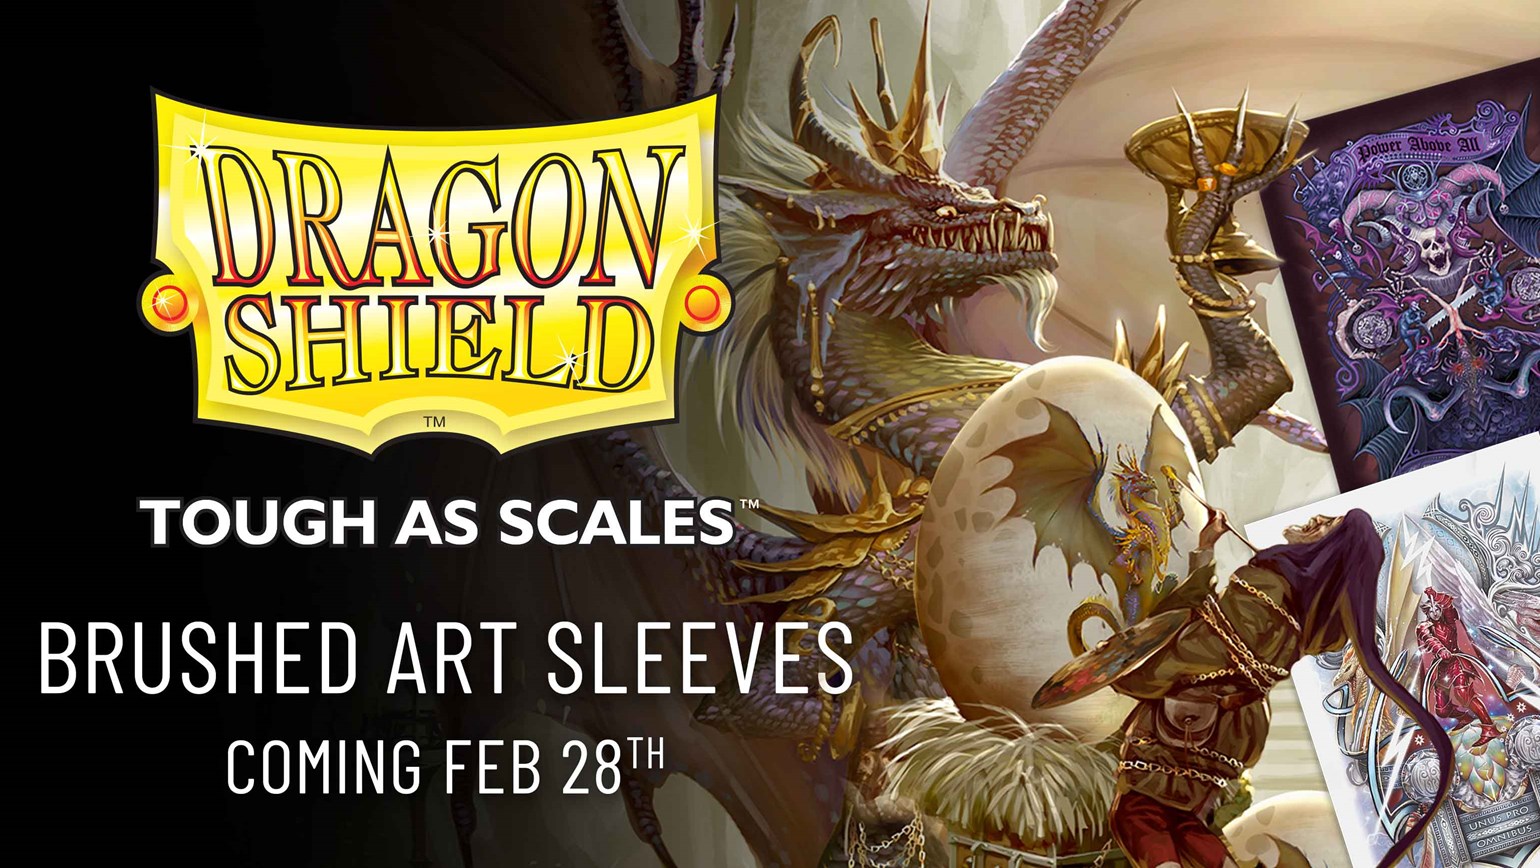 Brushed: A New Type of Sleeve from Dragon Shield Arrives February 28th